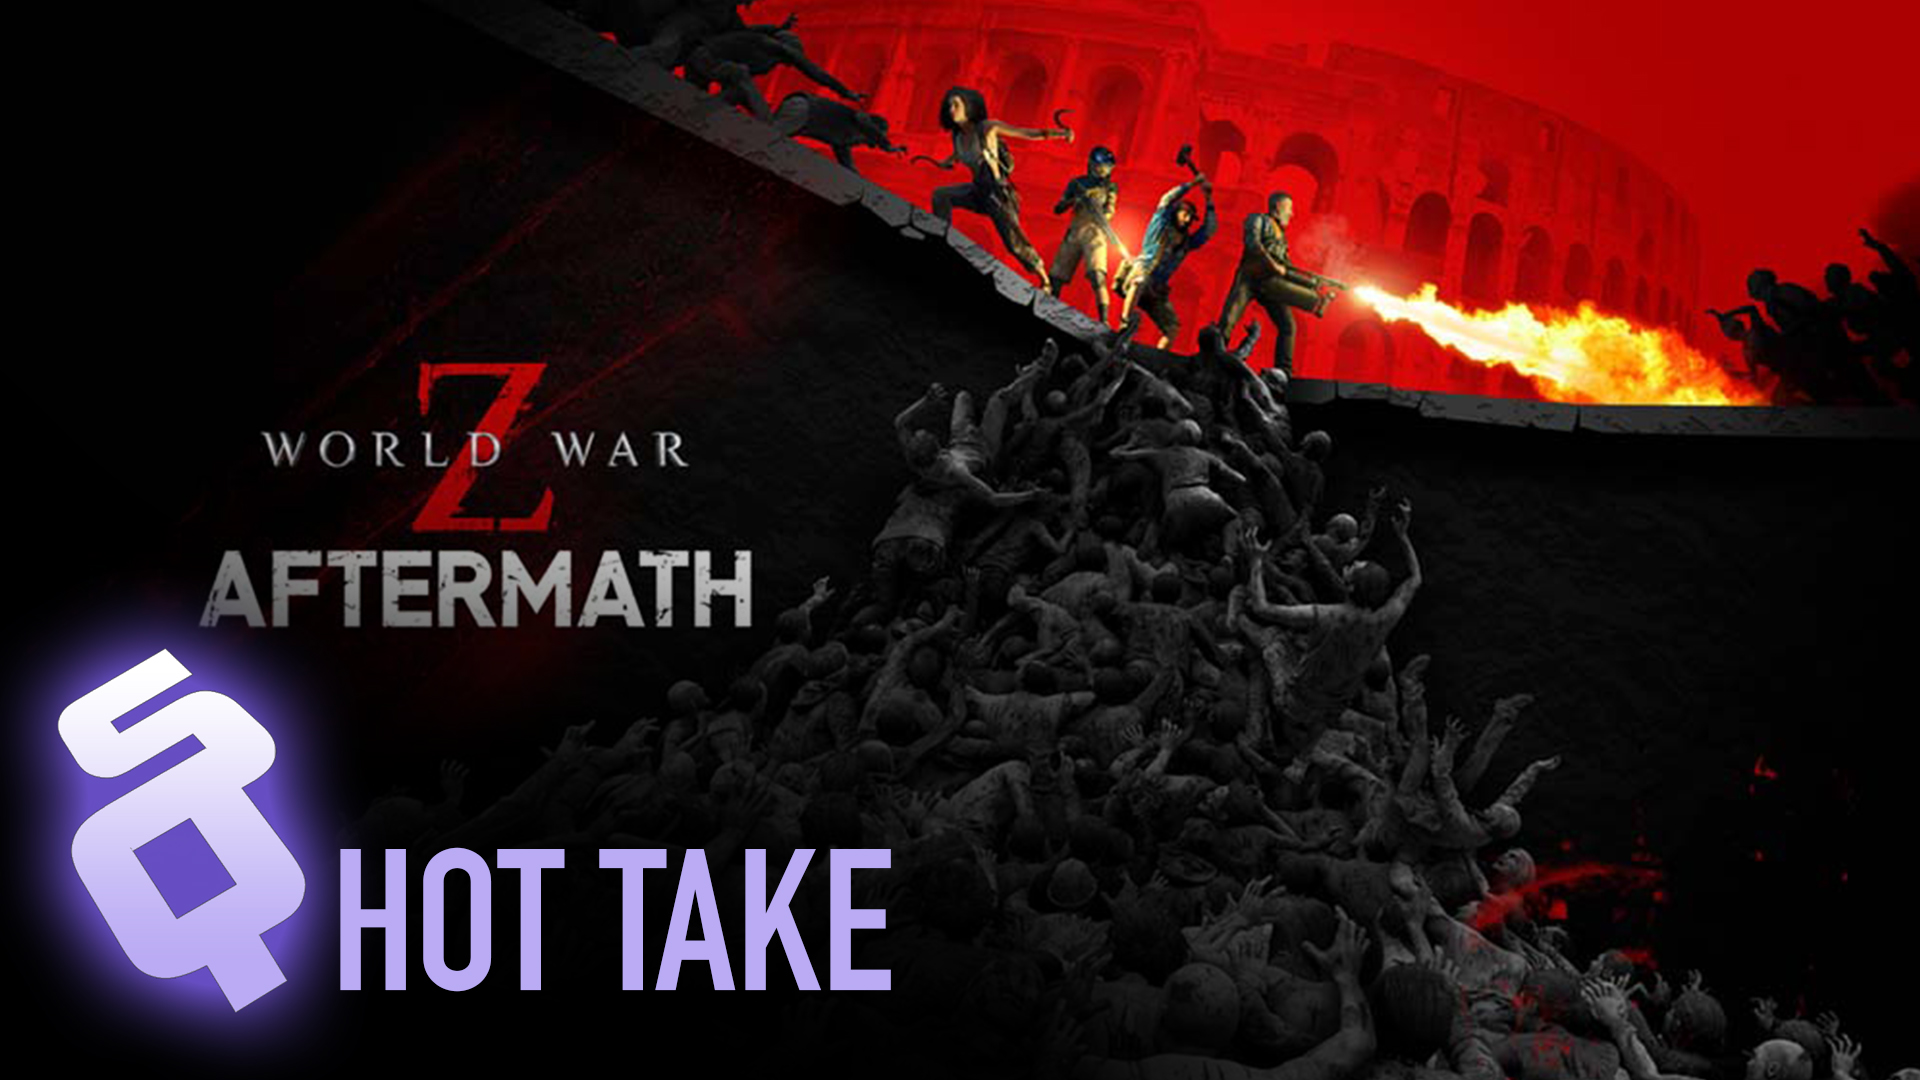 Review: World War Z Aftermath (PC)